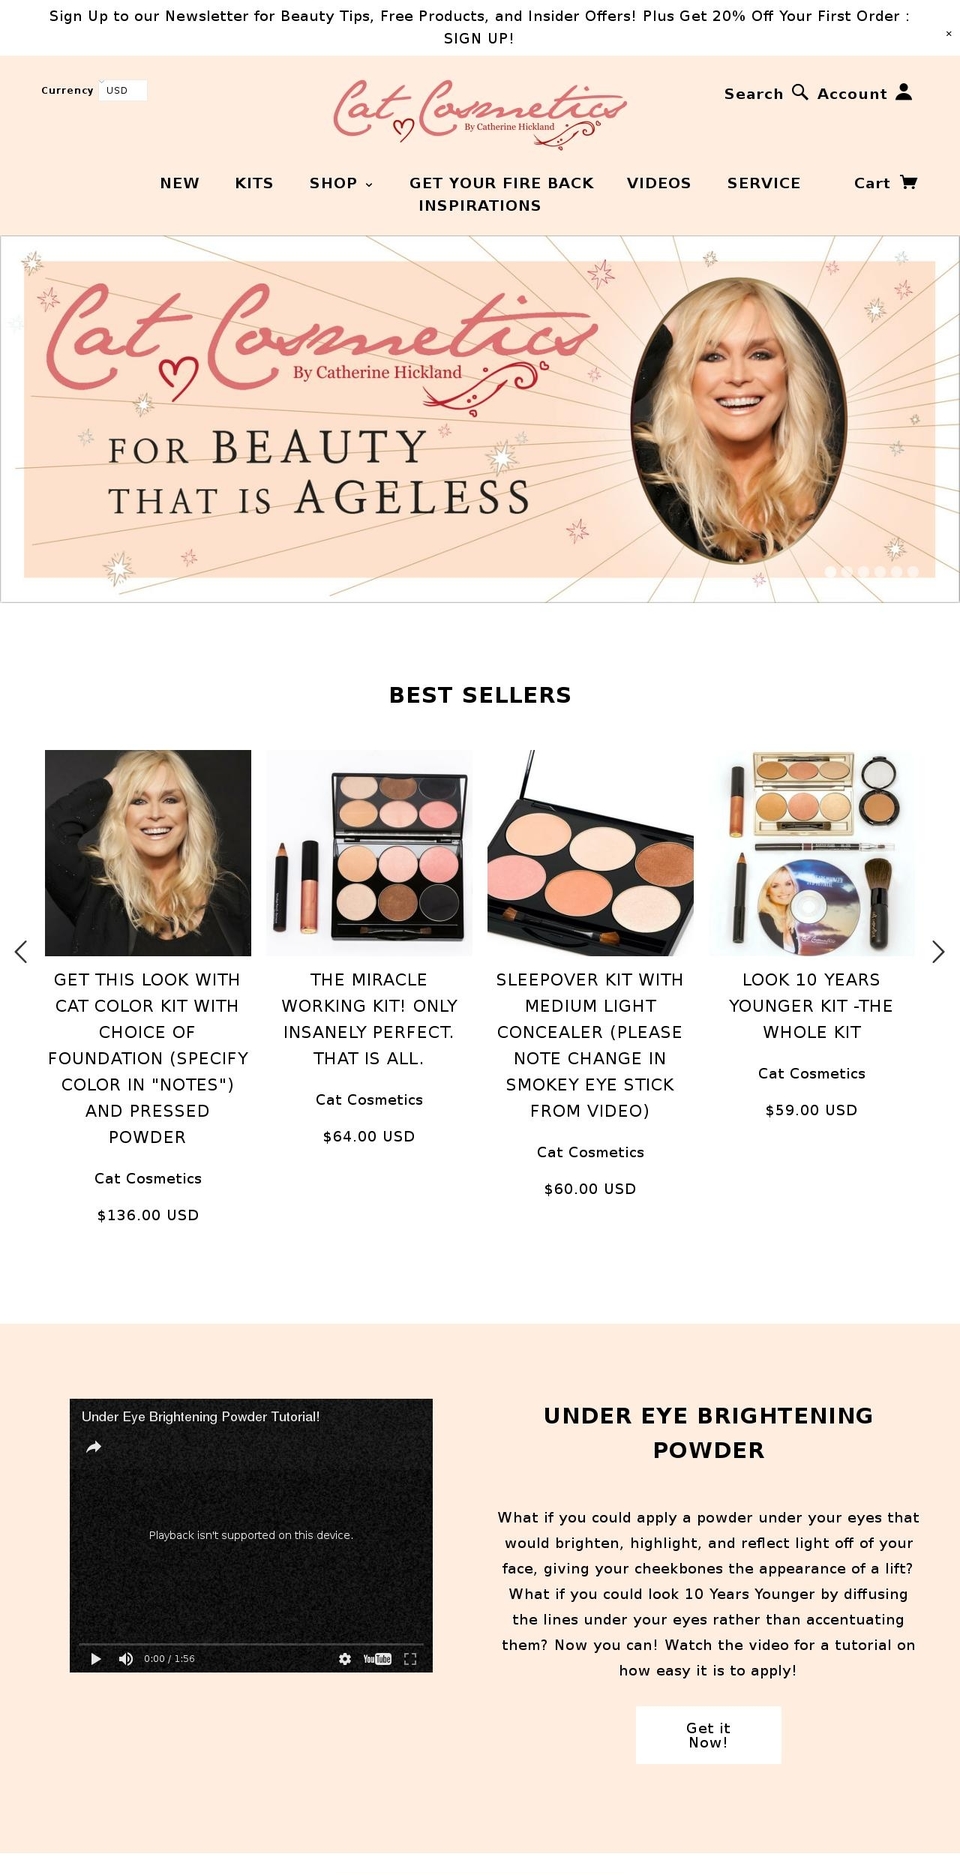 Be Yours Shopify theme site example catcosmetics.com